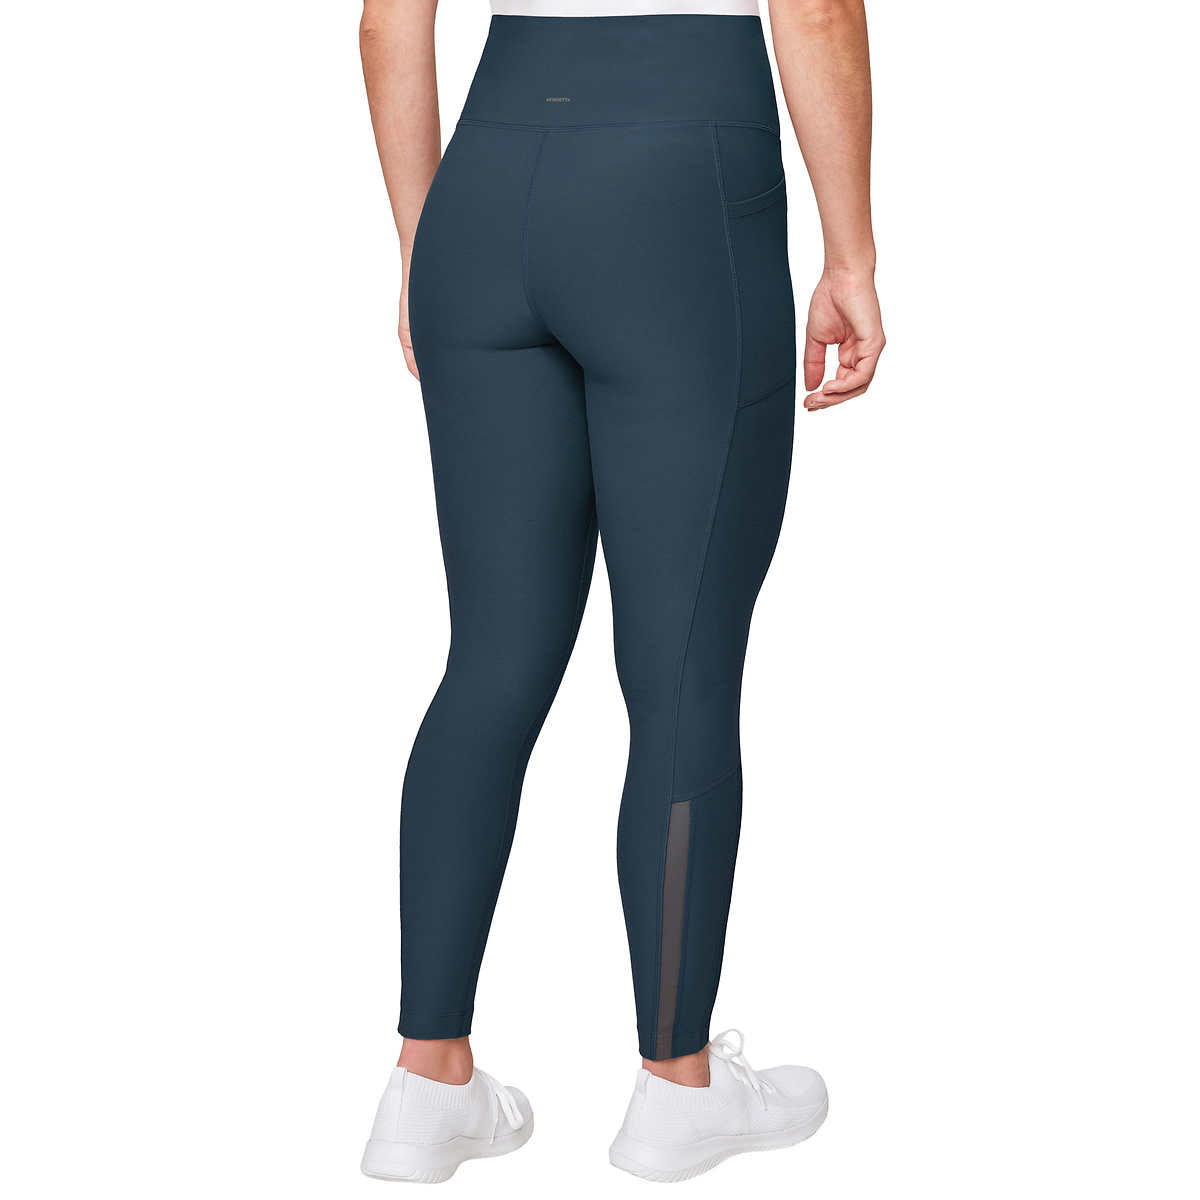 Mondetta Women's High Rise Side Pockets Mesh Cut Out Active Tight Moisture Wicking Leggings